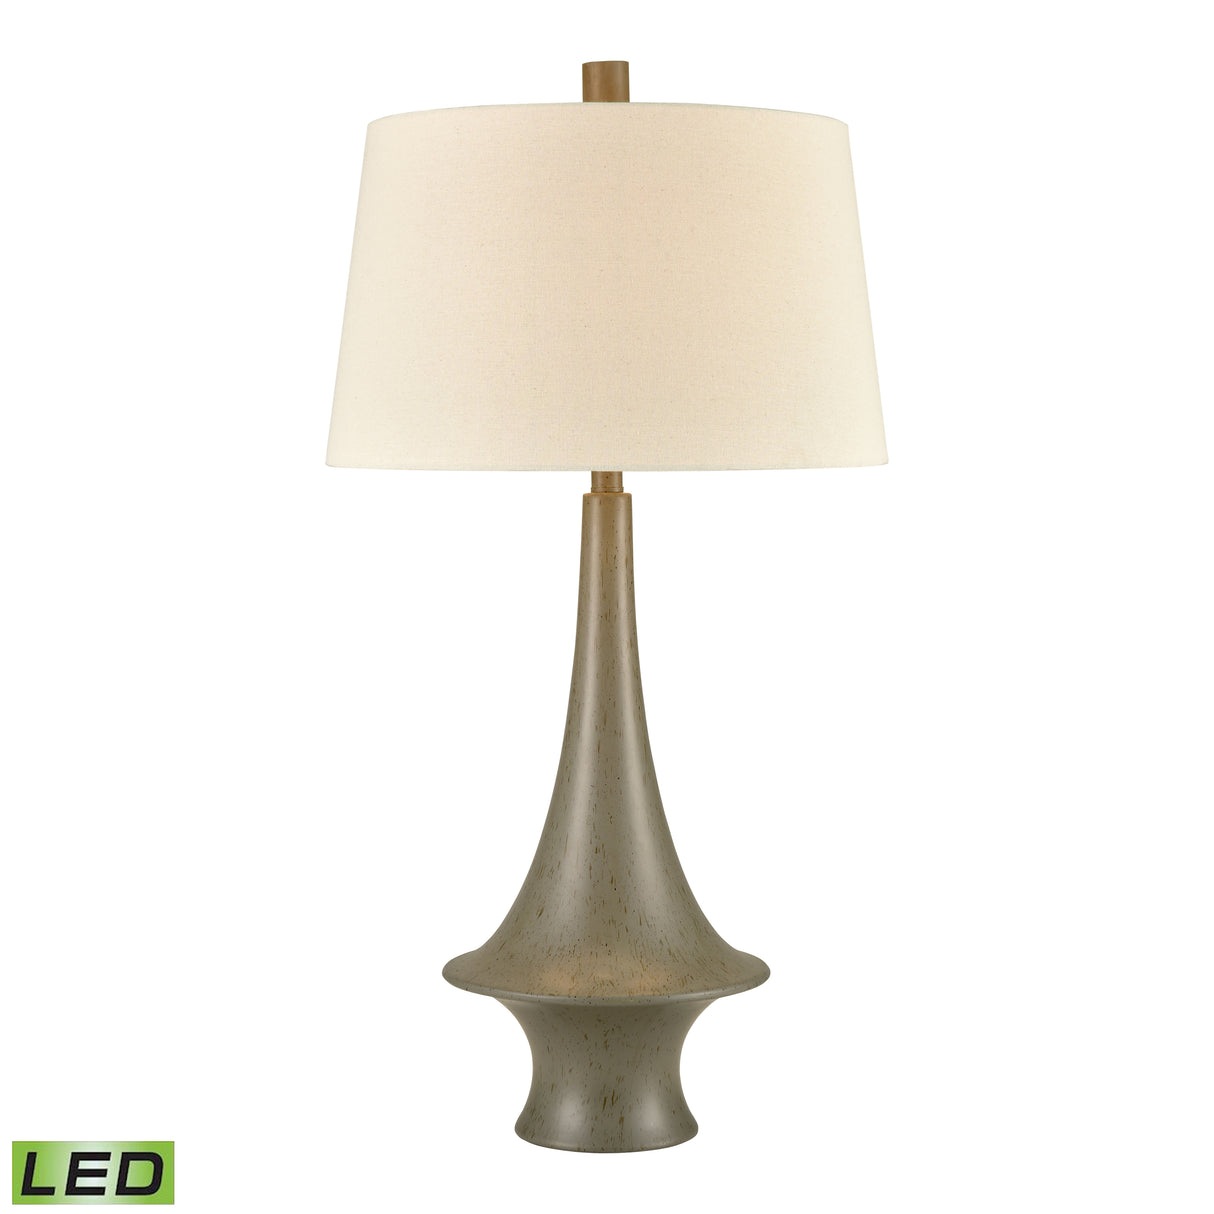 Elk 77208-LED Winchell 33'' High 1-Light Table Lamp - Polished Concrete - Includes LED Bulb